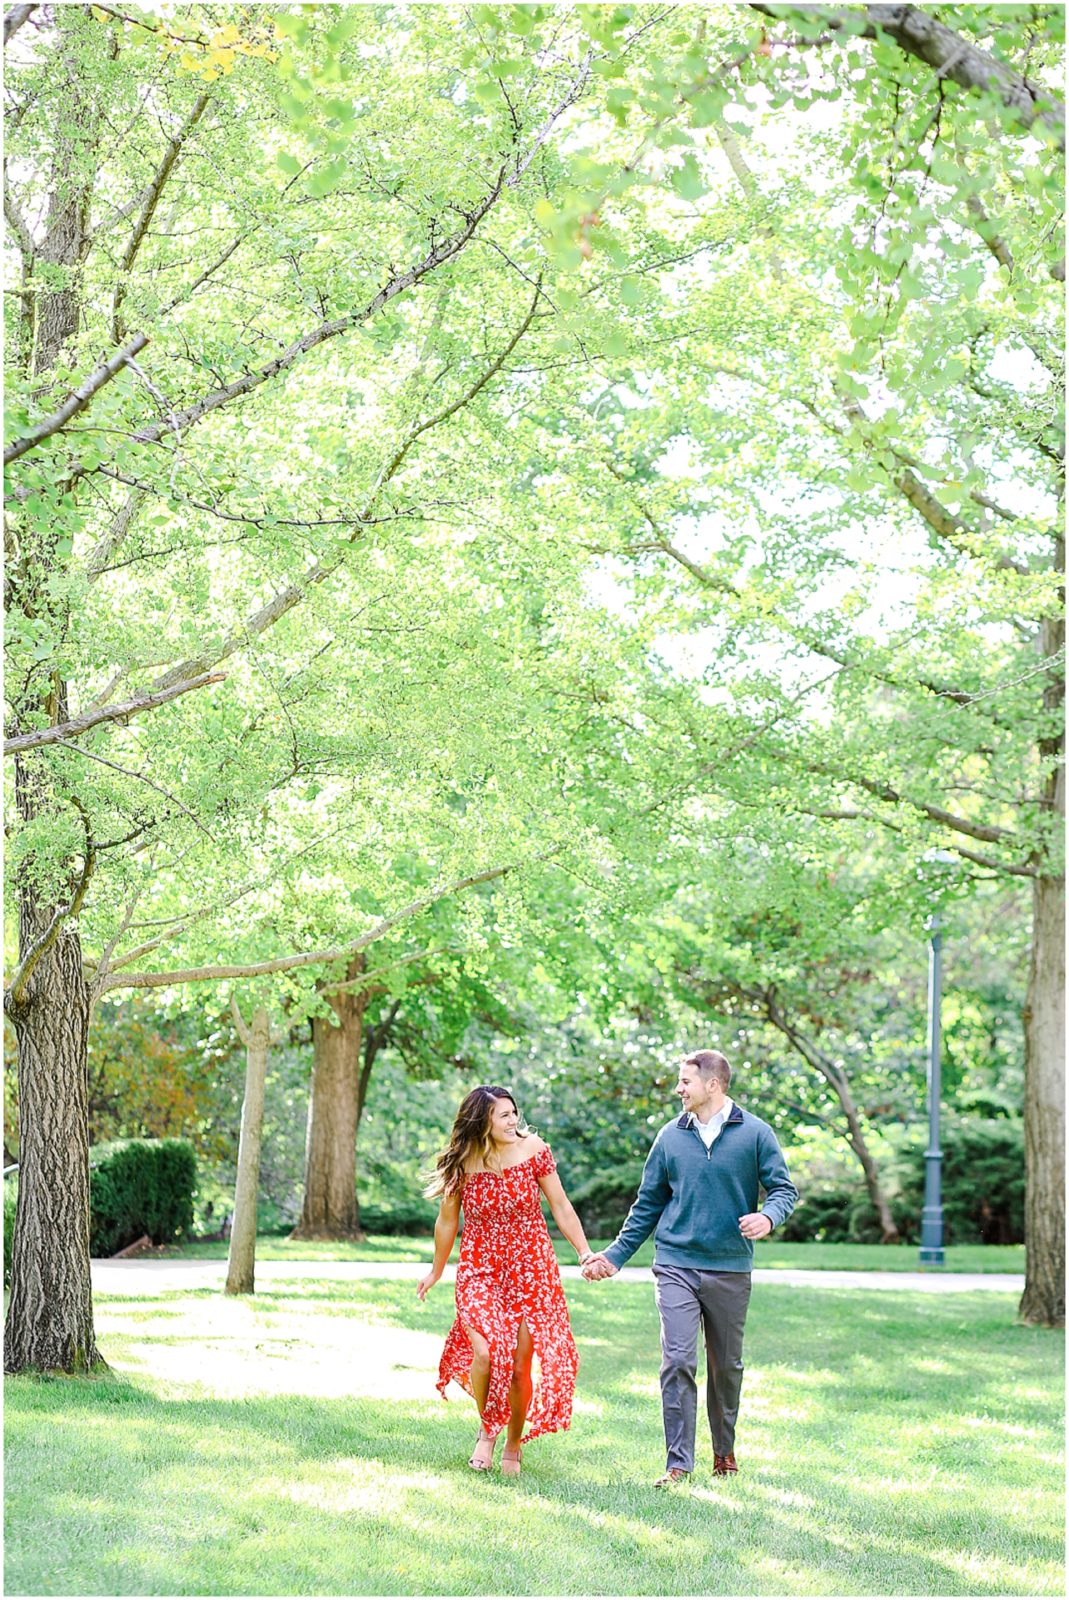 Emily & Cory's Kansas City Engagement Session at Nelson Atkins Museum ...